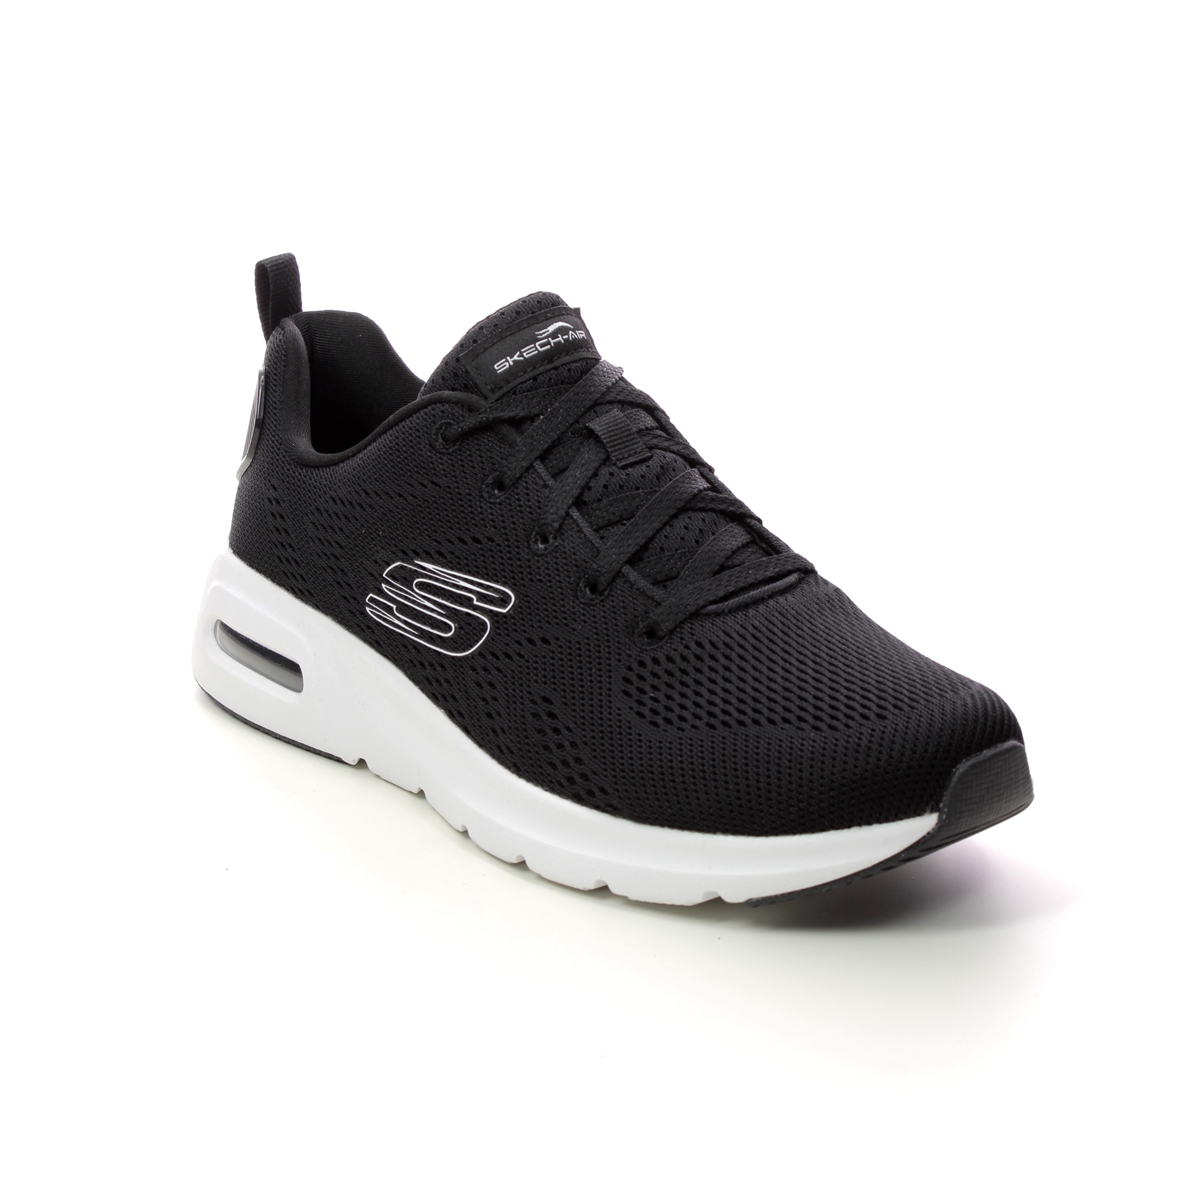 Skechers Skech Air Court Black White Womens Trainers 149948 In Size 8 In Plain Black White